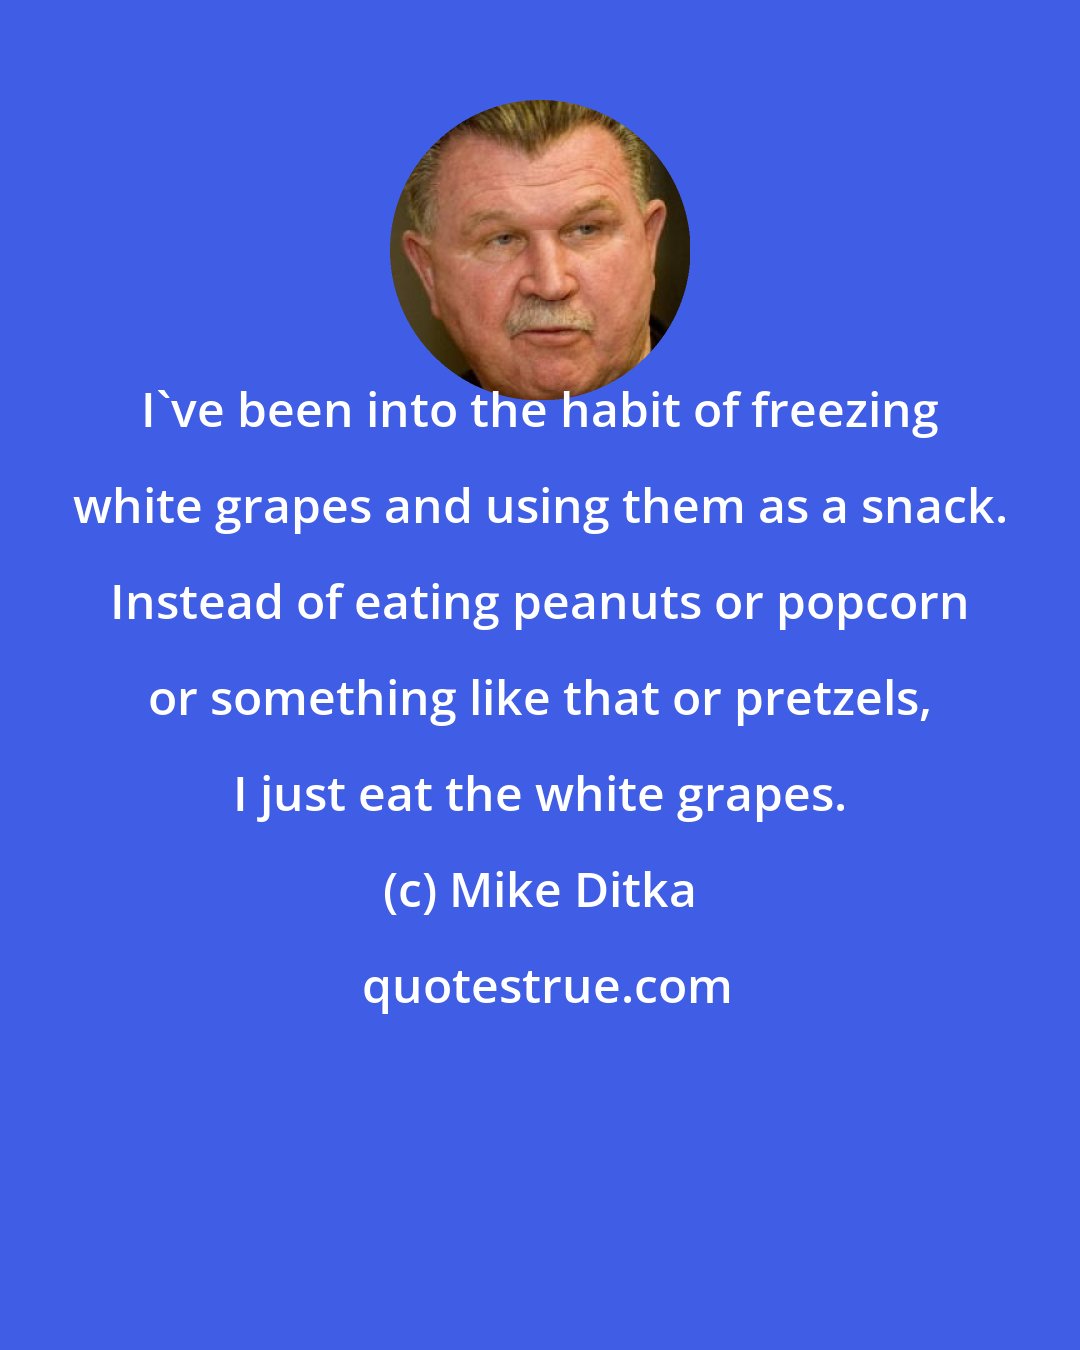 Mike Ditka: I've been into the habit of freezing white grapes and using them as a snack. Instead of eating peanuts or popcorn or something like that or pretzels, I just eat the white grapes.